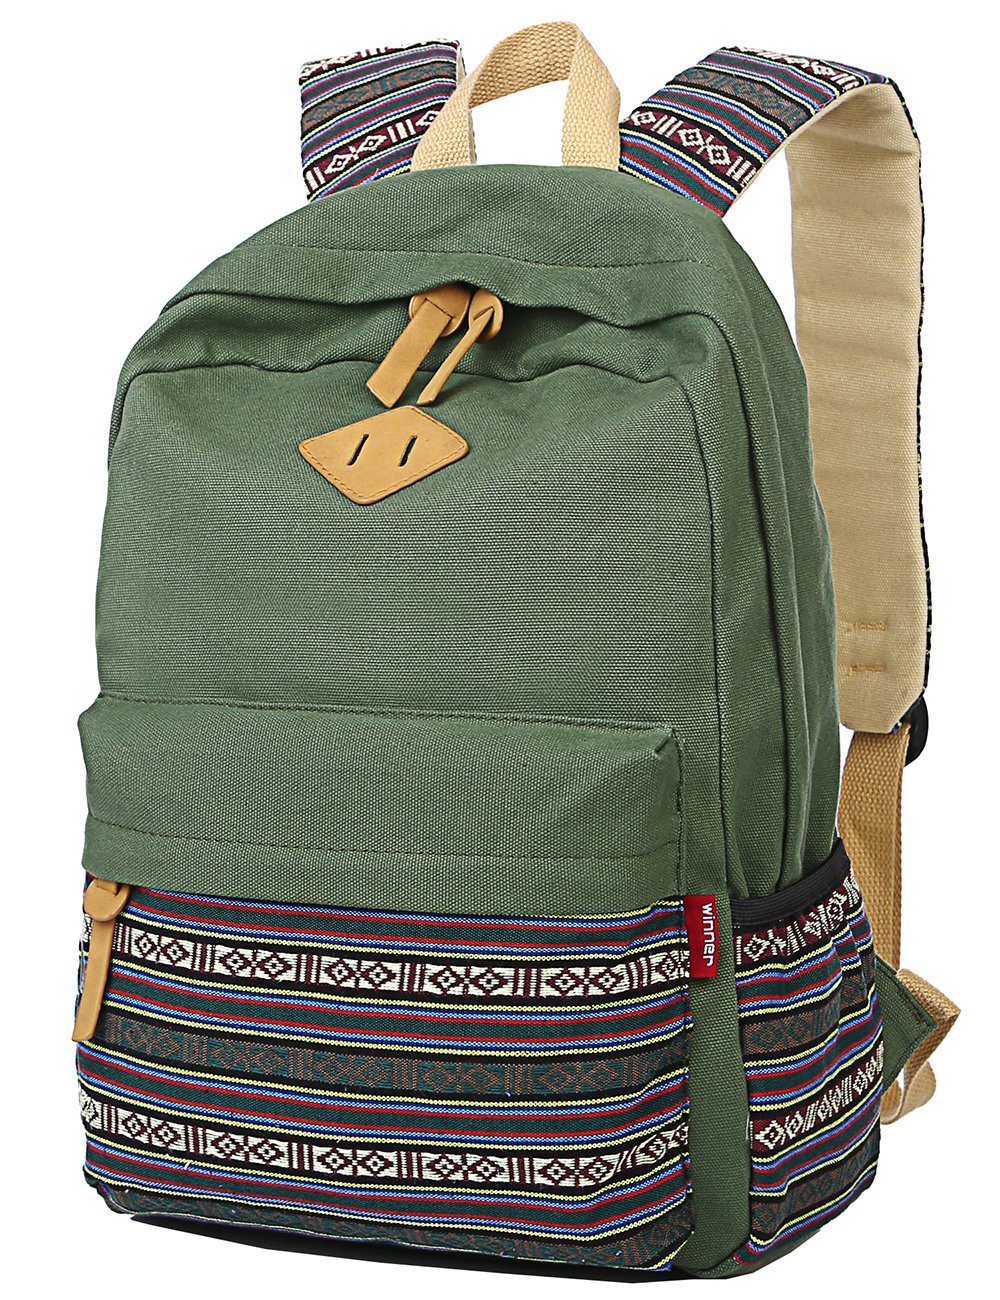 mygreen Casual Style Lightweight Canvas Backpack School Bag Travel Daypack Army Green